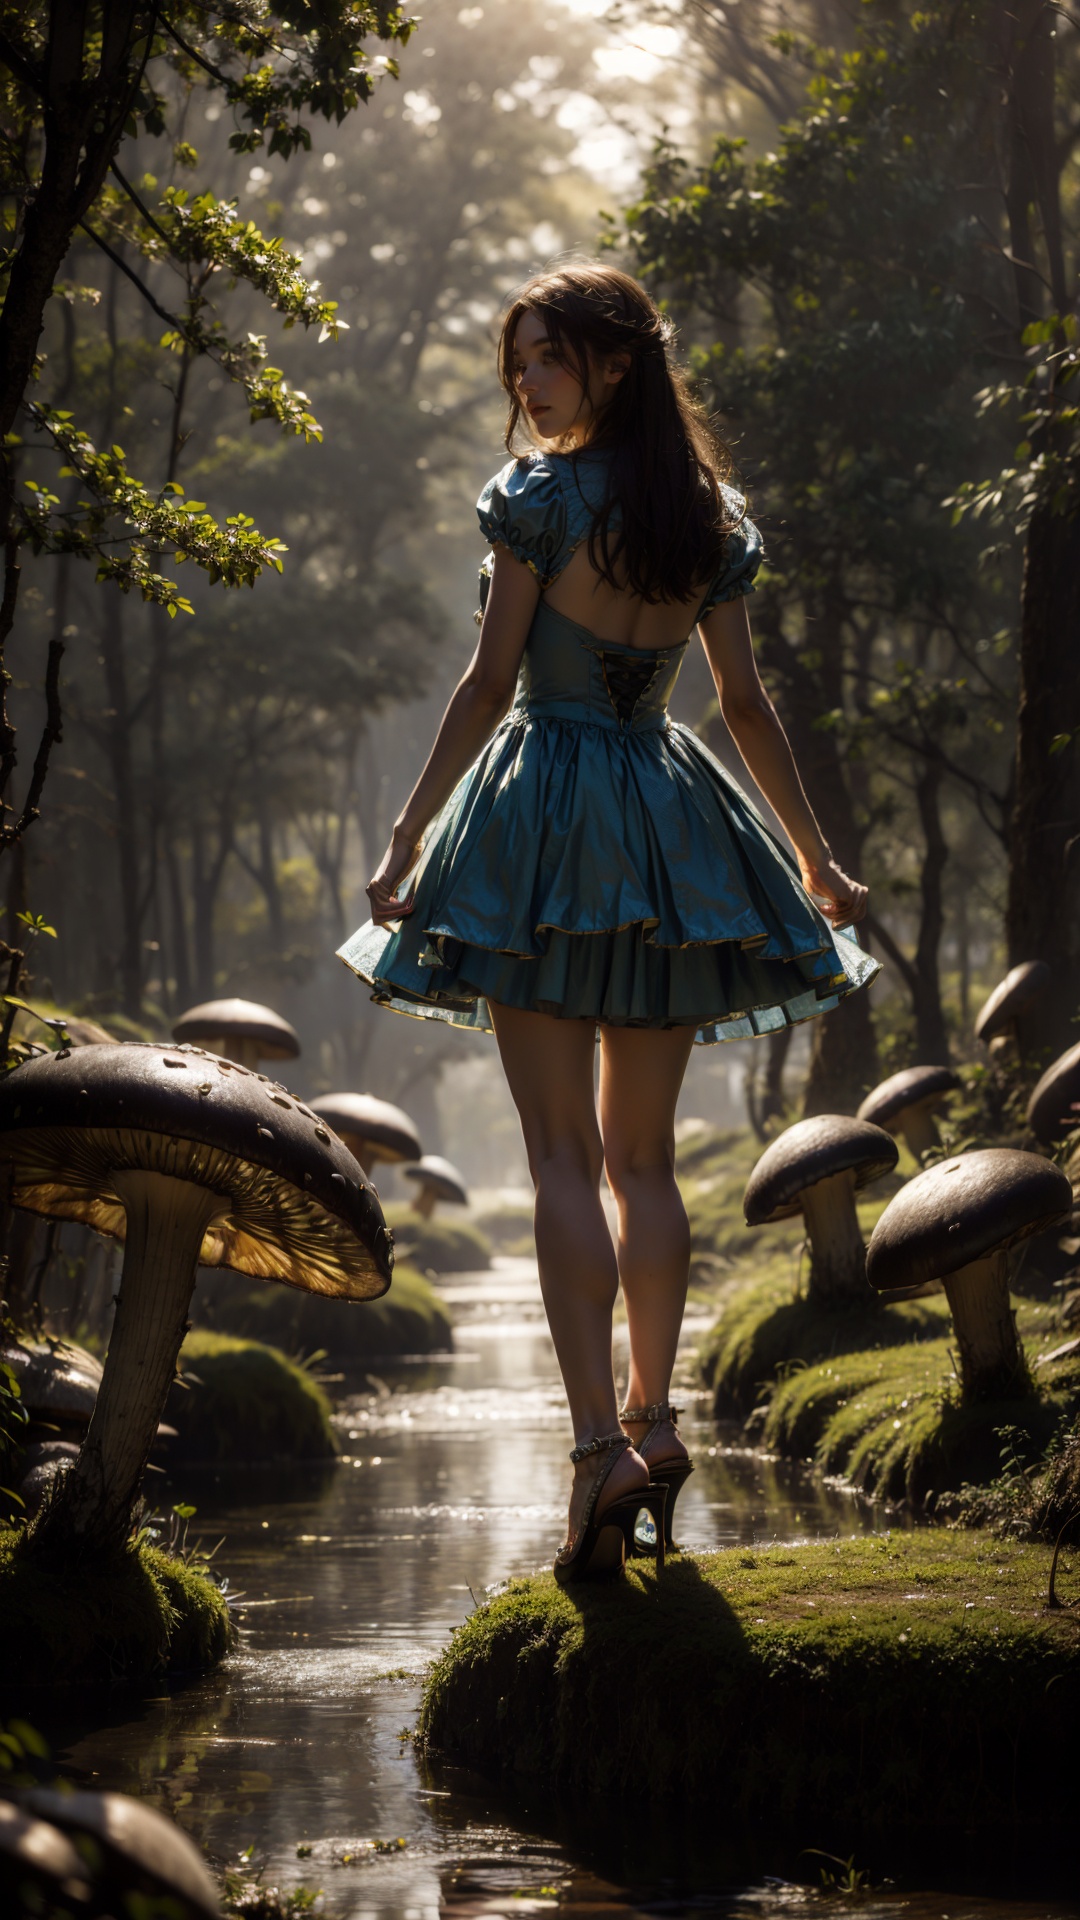 tutututu,high heels,***** Alice in wonderland standing in stream,large mushrooms in background,highly detailed,Beautiful lighting,photoreal,4k,depth of field,night scene,light from godrays shining on ground,<lora:merged_0020:1>,